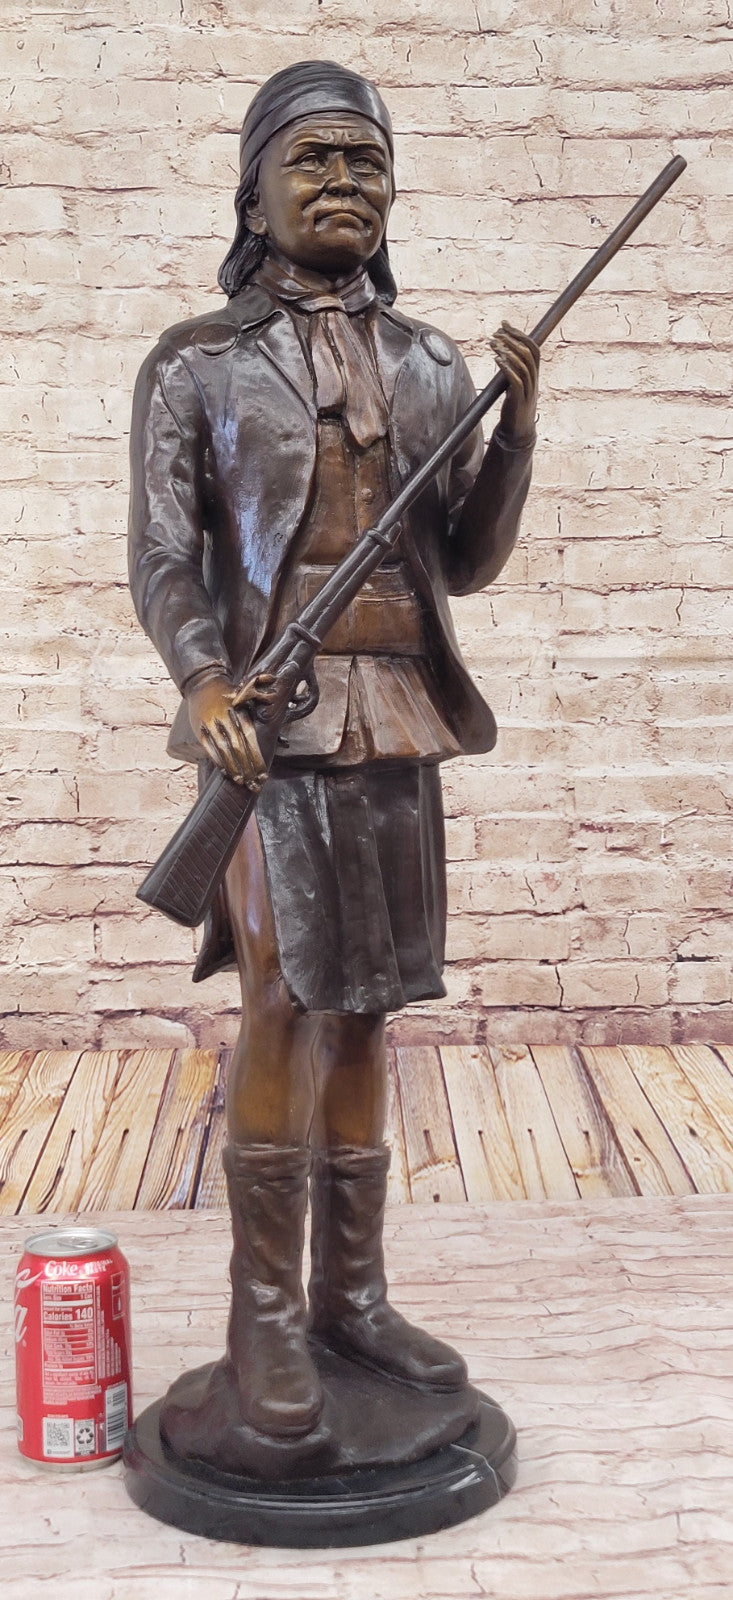 C.M Russell Bronze Sculpture Geronimo With Rifle Hot Cast Figure Statue